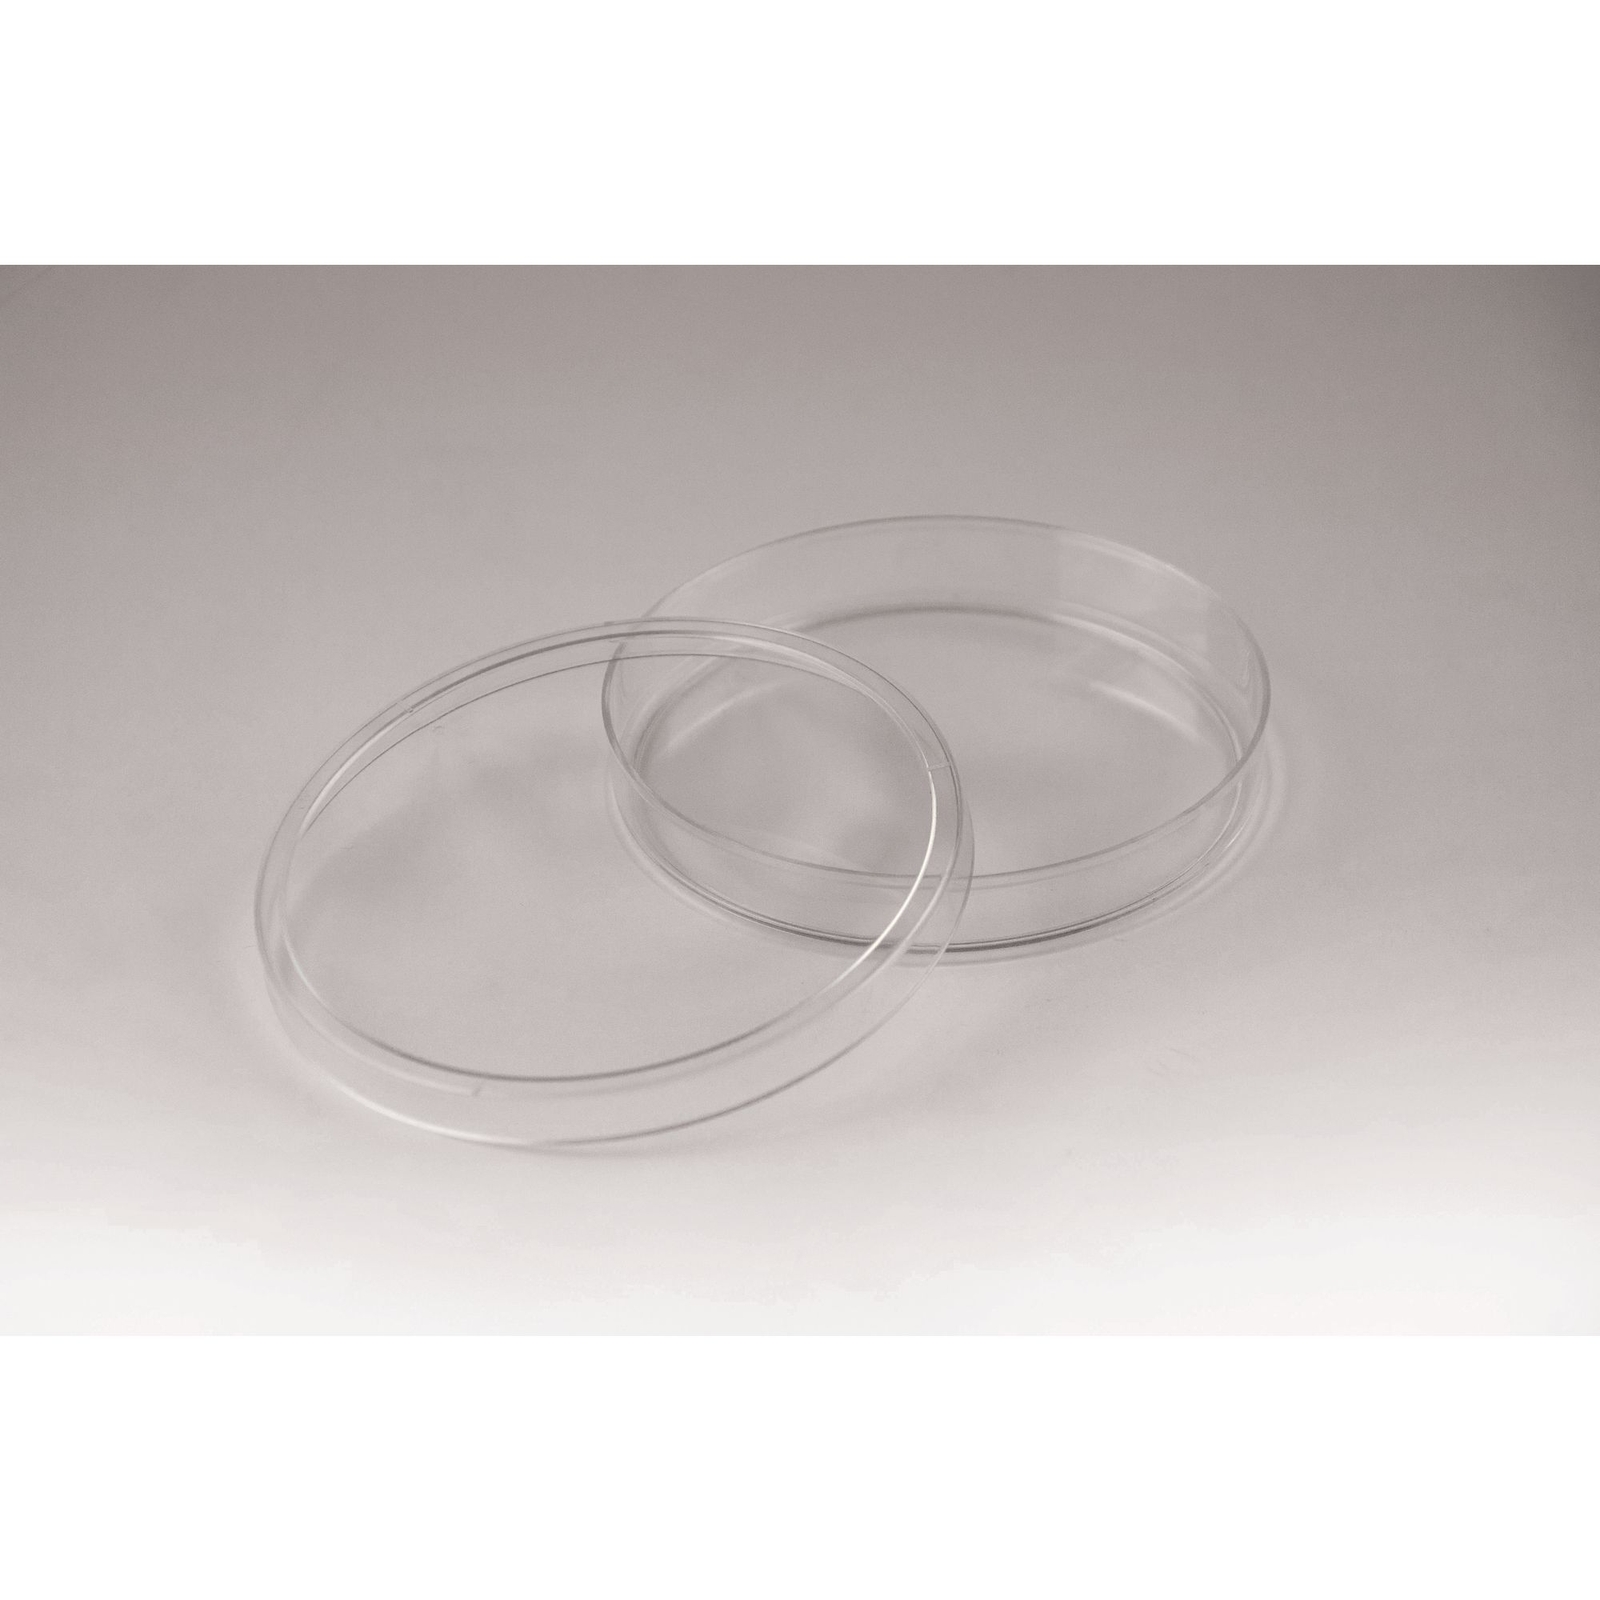 Petri Dishes, Disposable - 90 x 15mm - Pack of 500